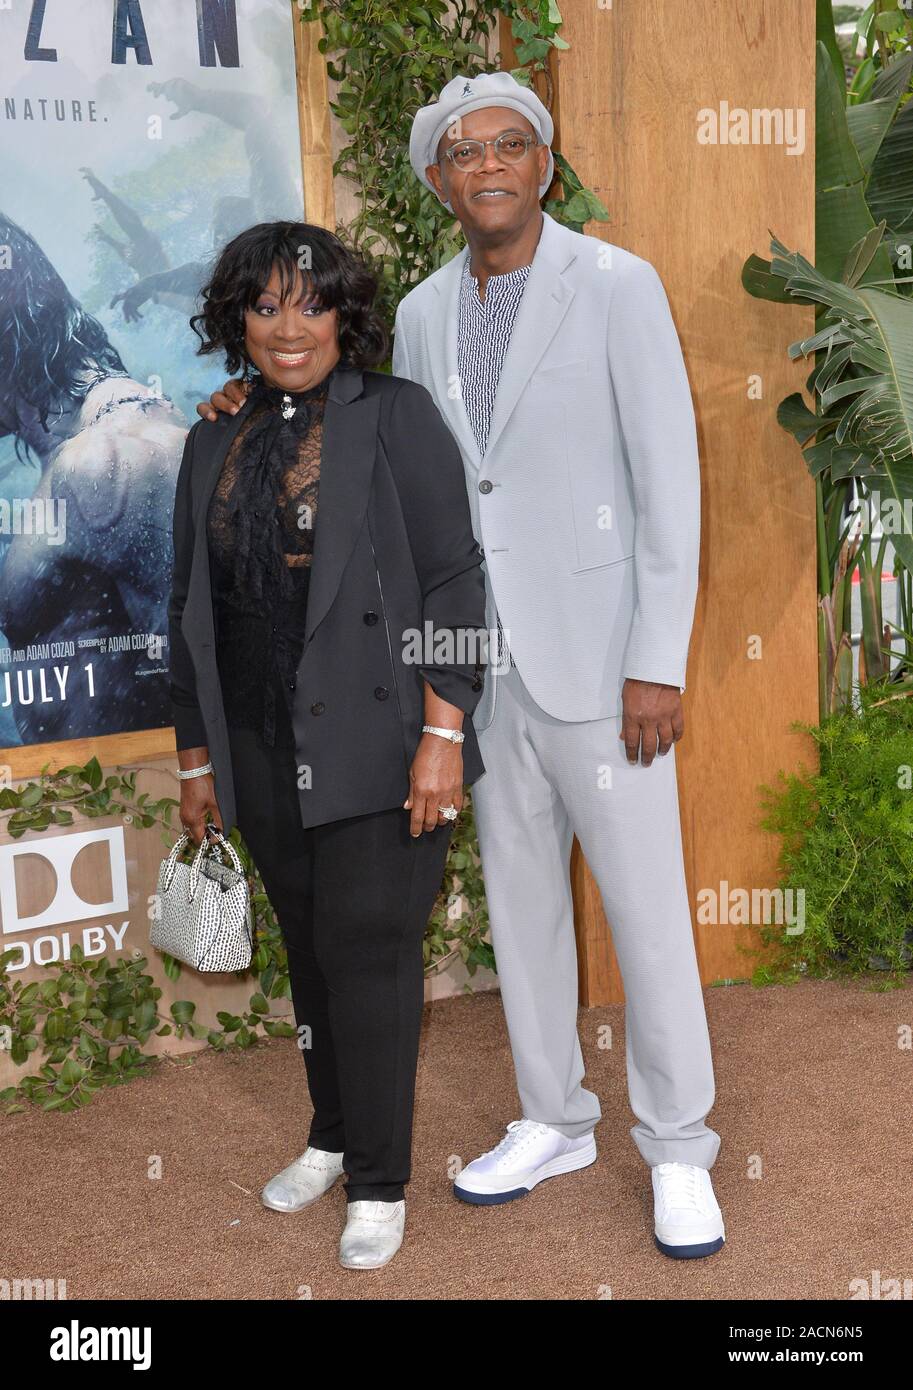 LOS ANGELES, CA. June 27, 2016: Actor Samuel L. Jackson & wife actress LaTanya Richardson Jackson at the world premiere of 'The Legend of Tarzan' at the Dolby Theatre, Hollywood. © 2016 Paul Smith / Featureflash Stock Photo